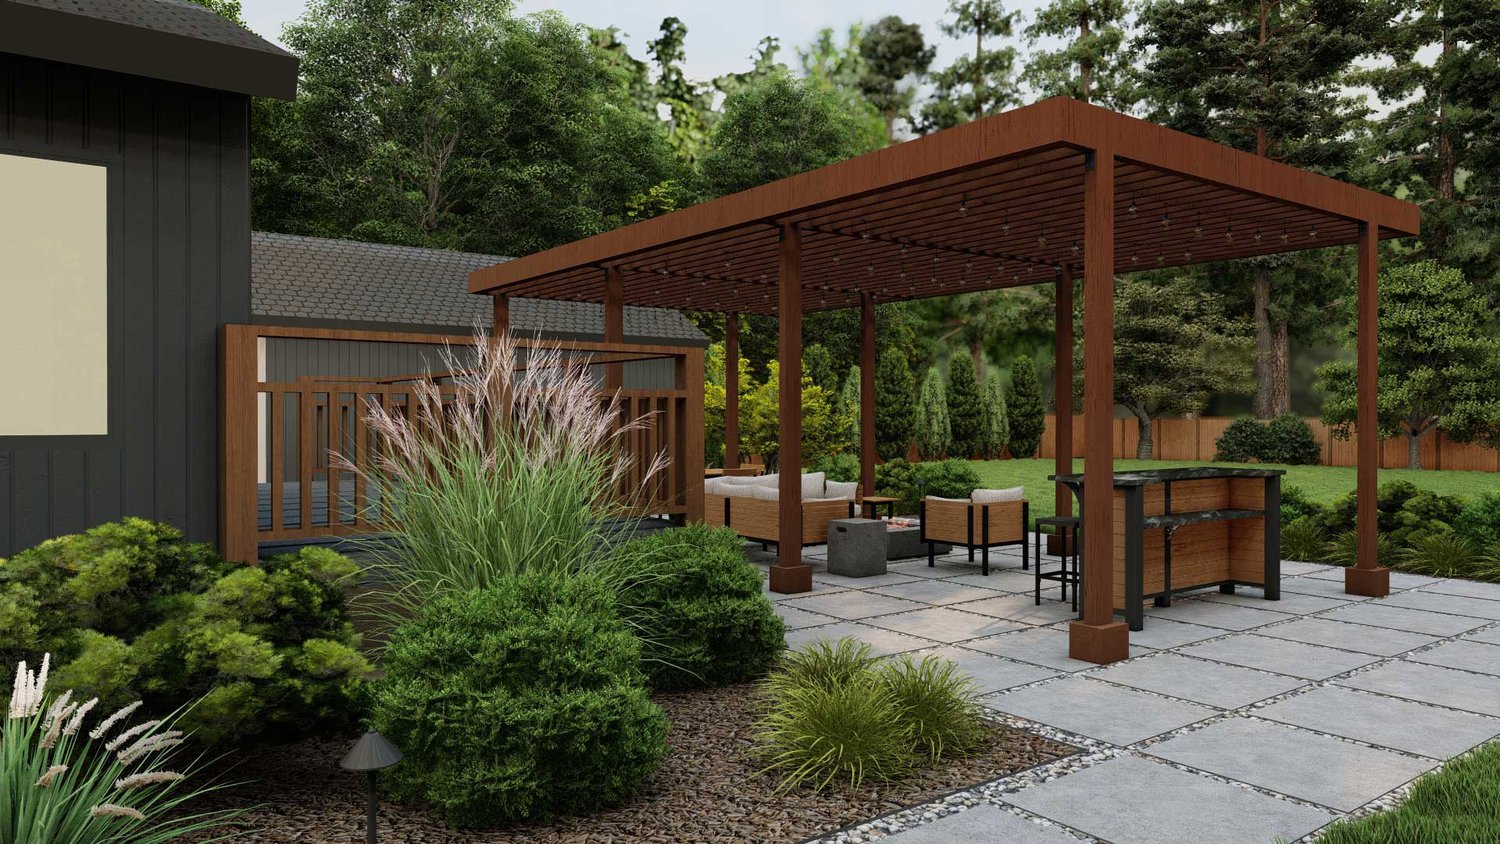 Tacoma backyard showing beautiful plants and sitting area with pergola built over it